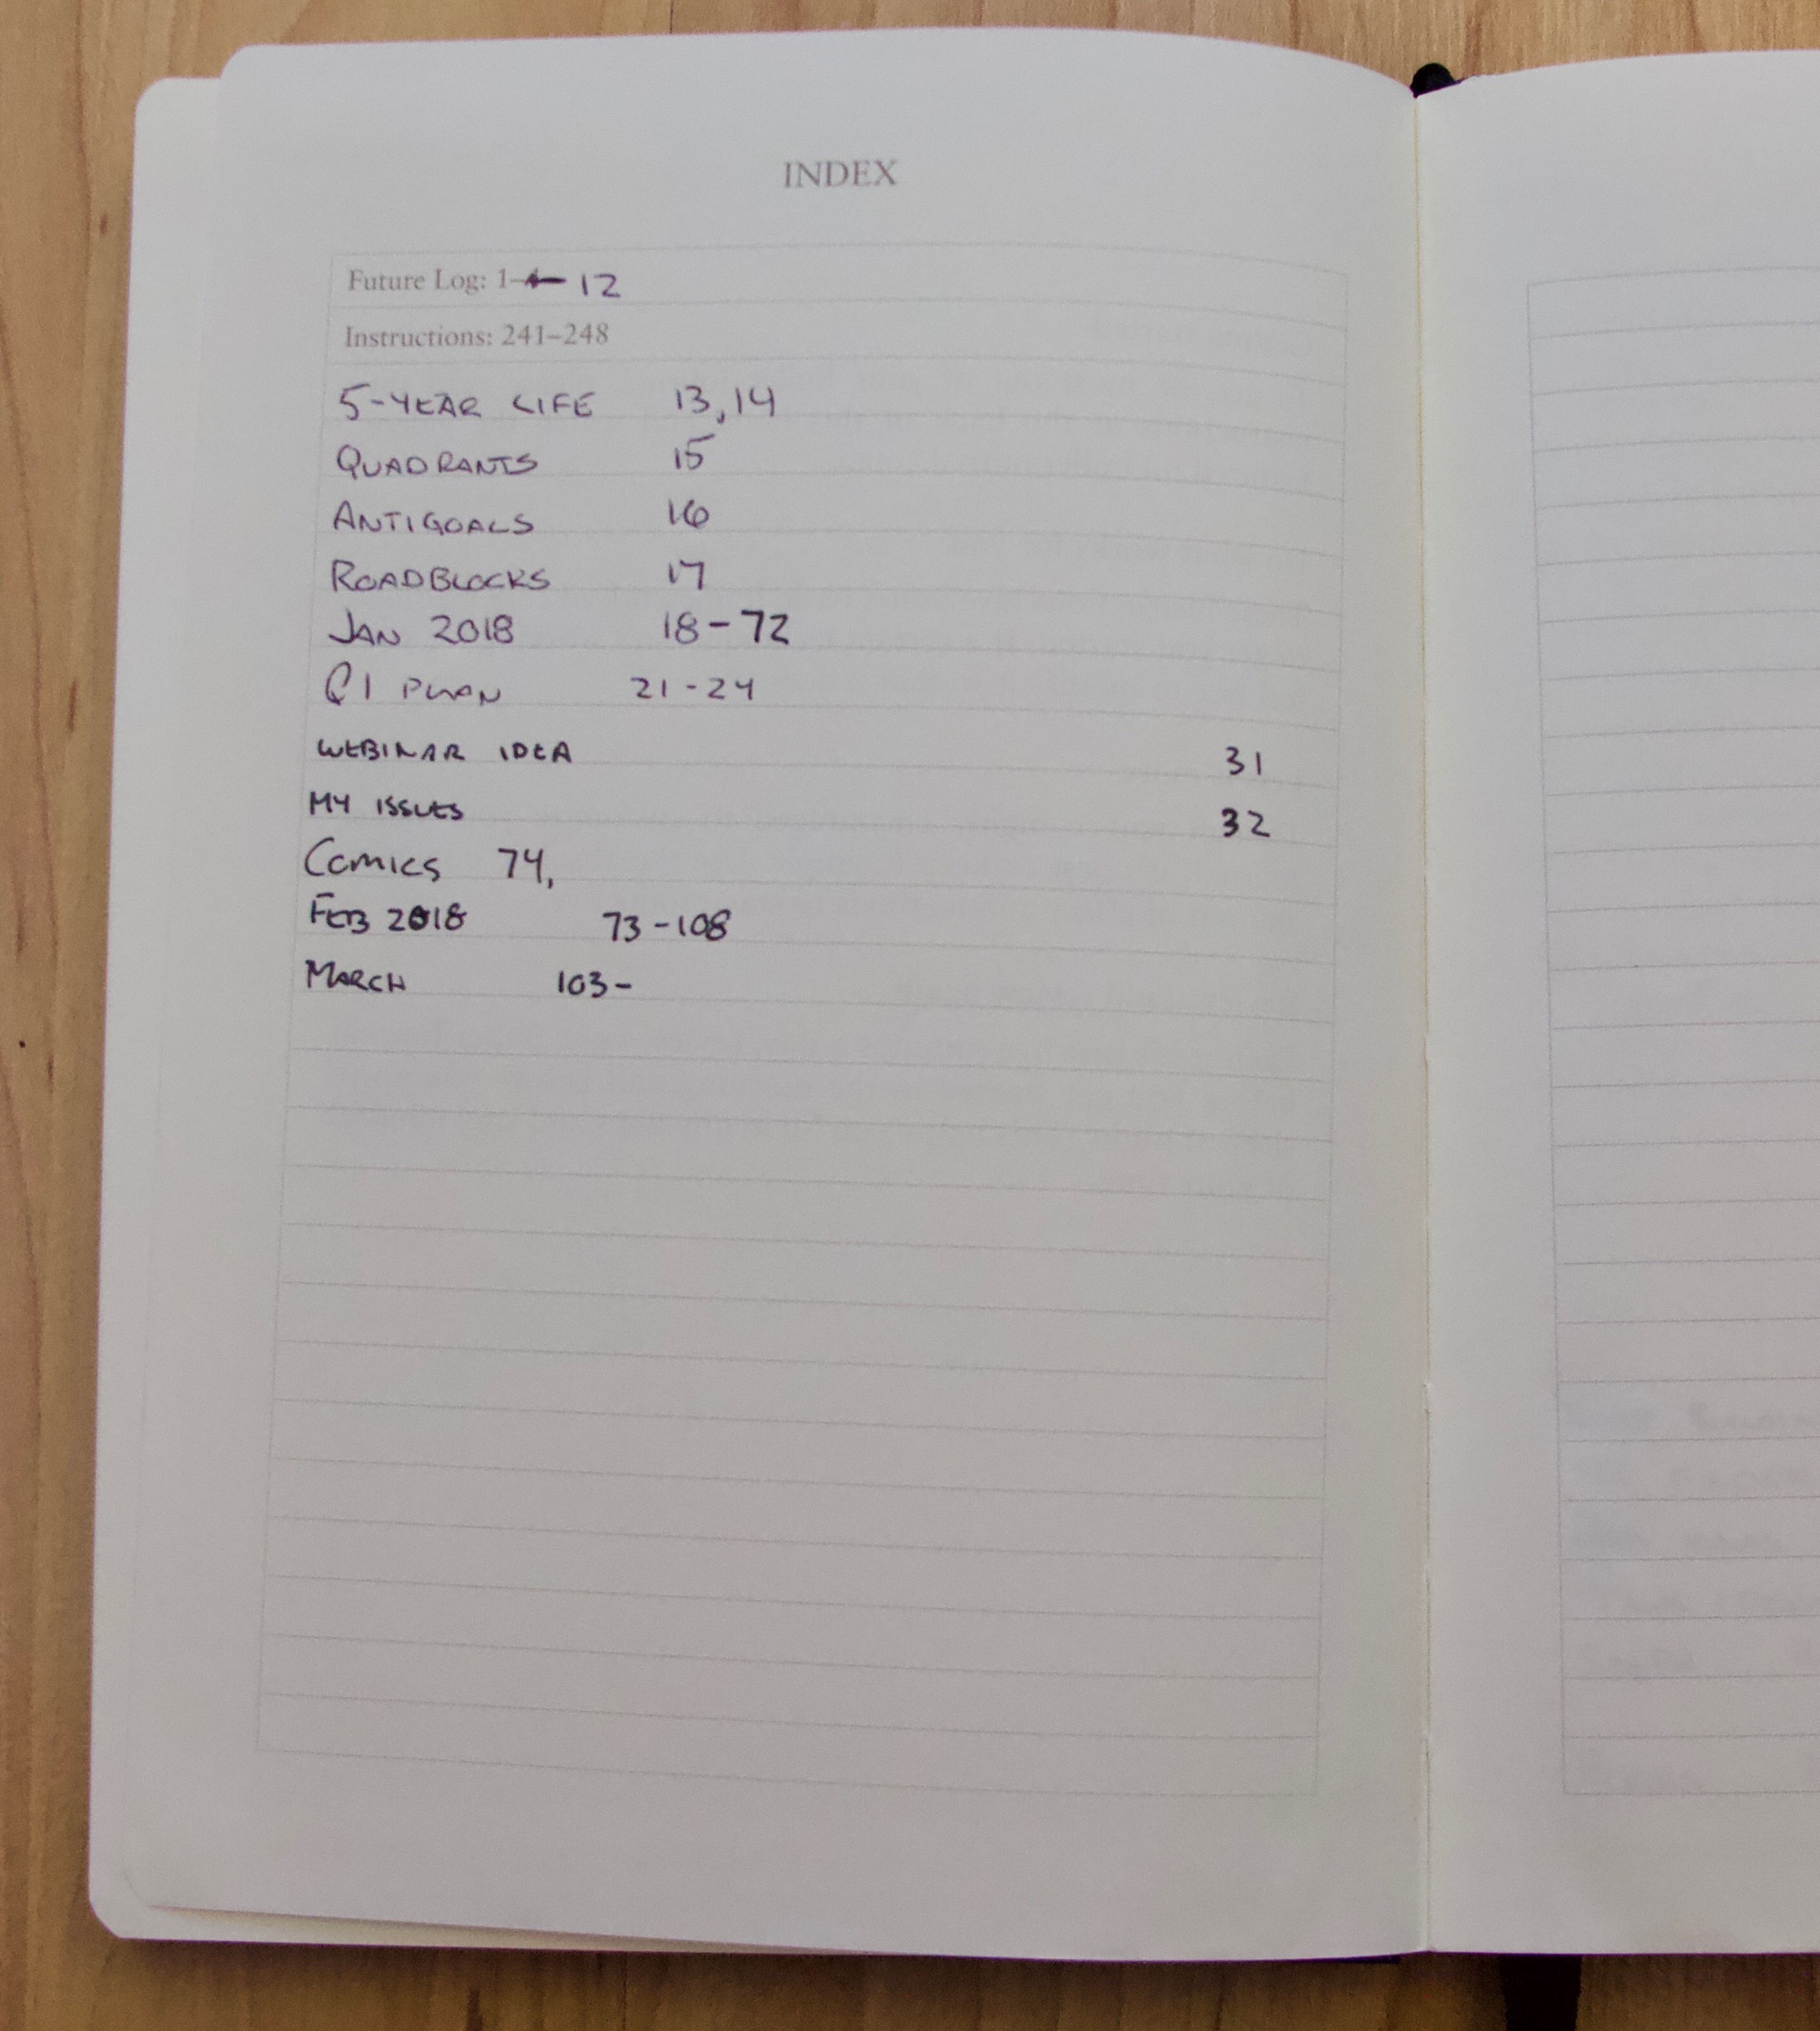 This is the index for your Bullet Journal